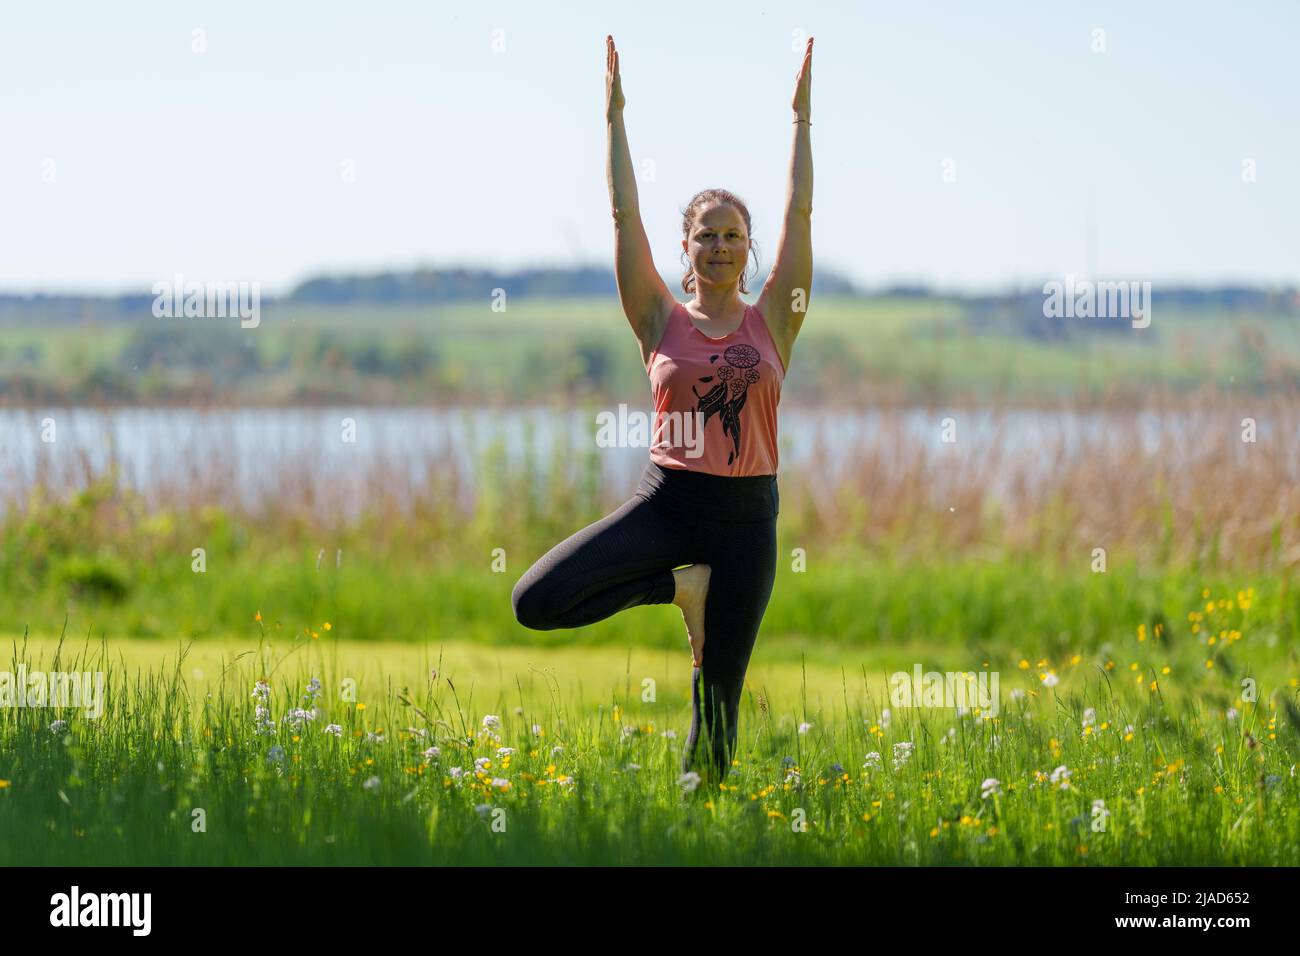 Woman doing tree pose by Wallersee, Salzburg, Austria Stock Photo